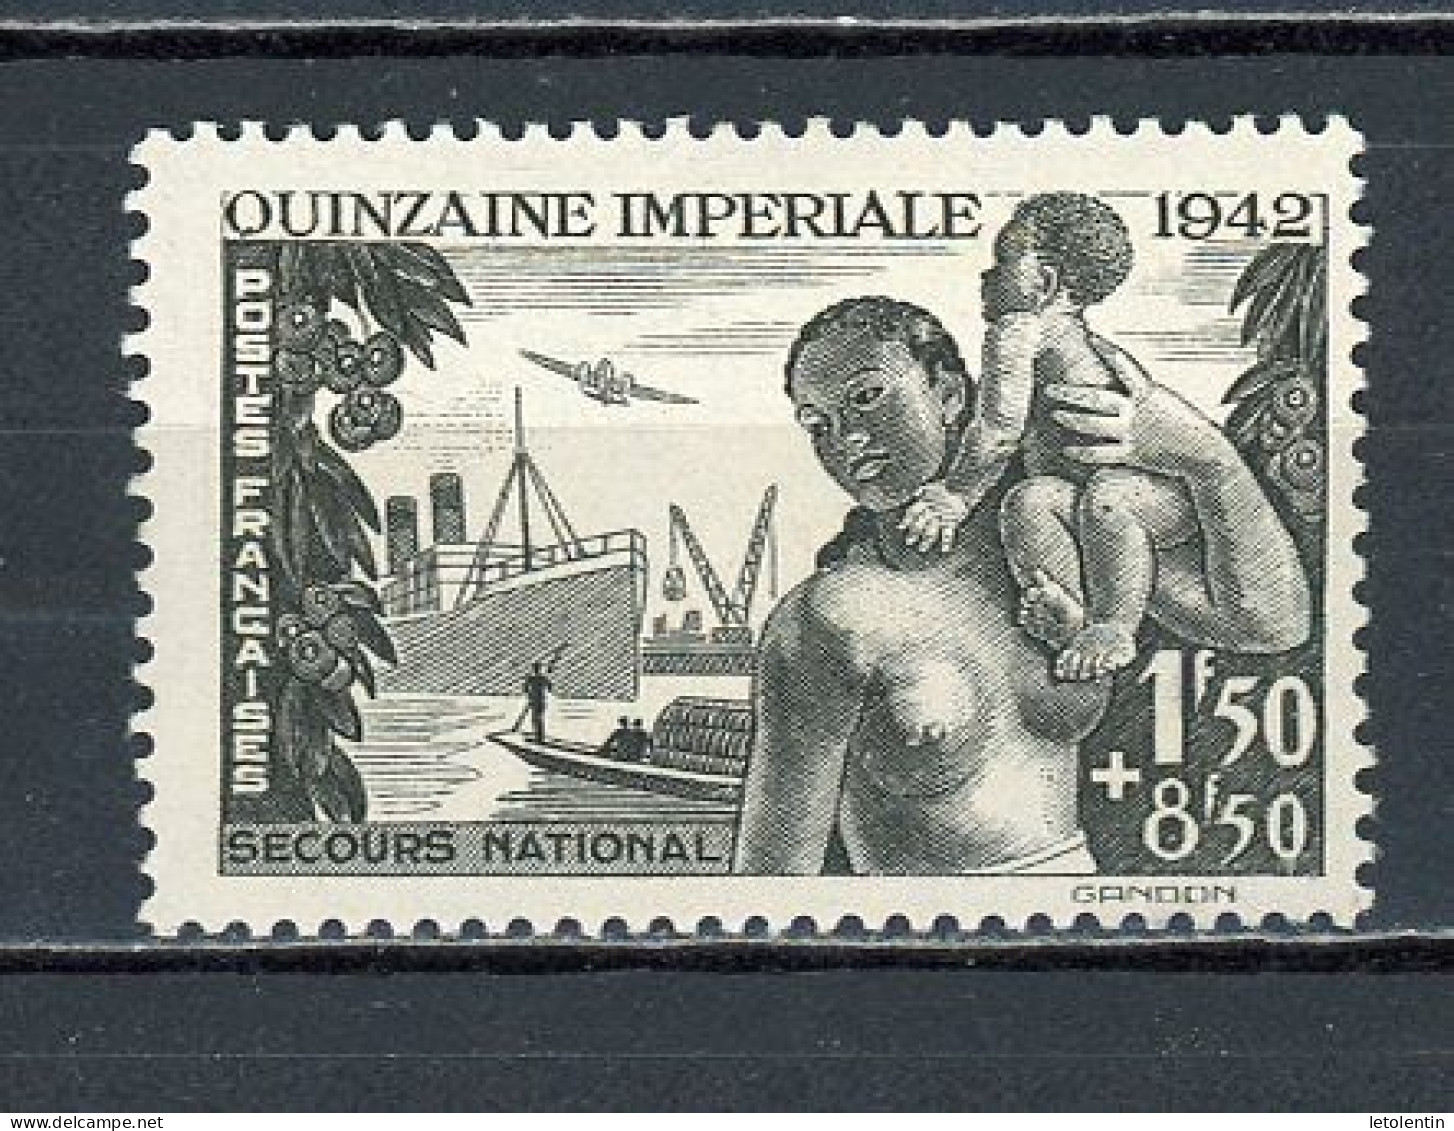 FRANCE - QUINZAINE IMPERIALE - N° Yvert 543 * - Nuovi